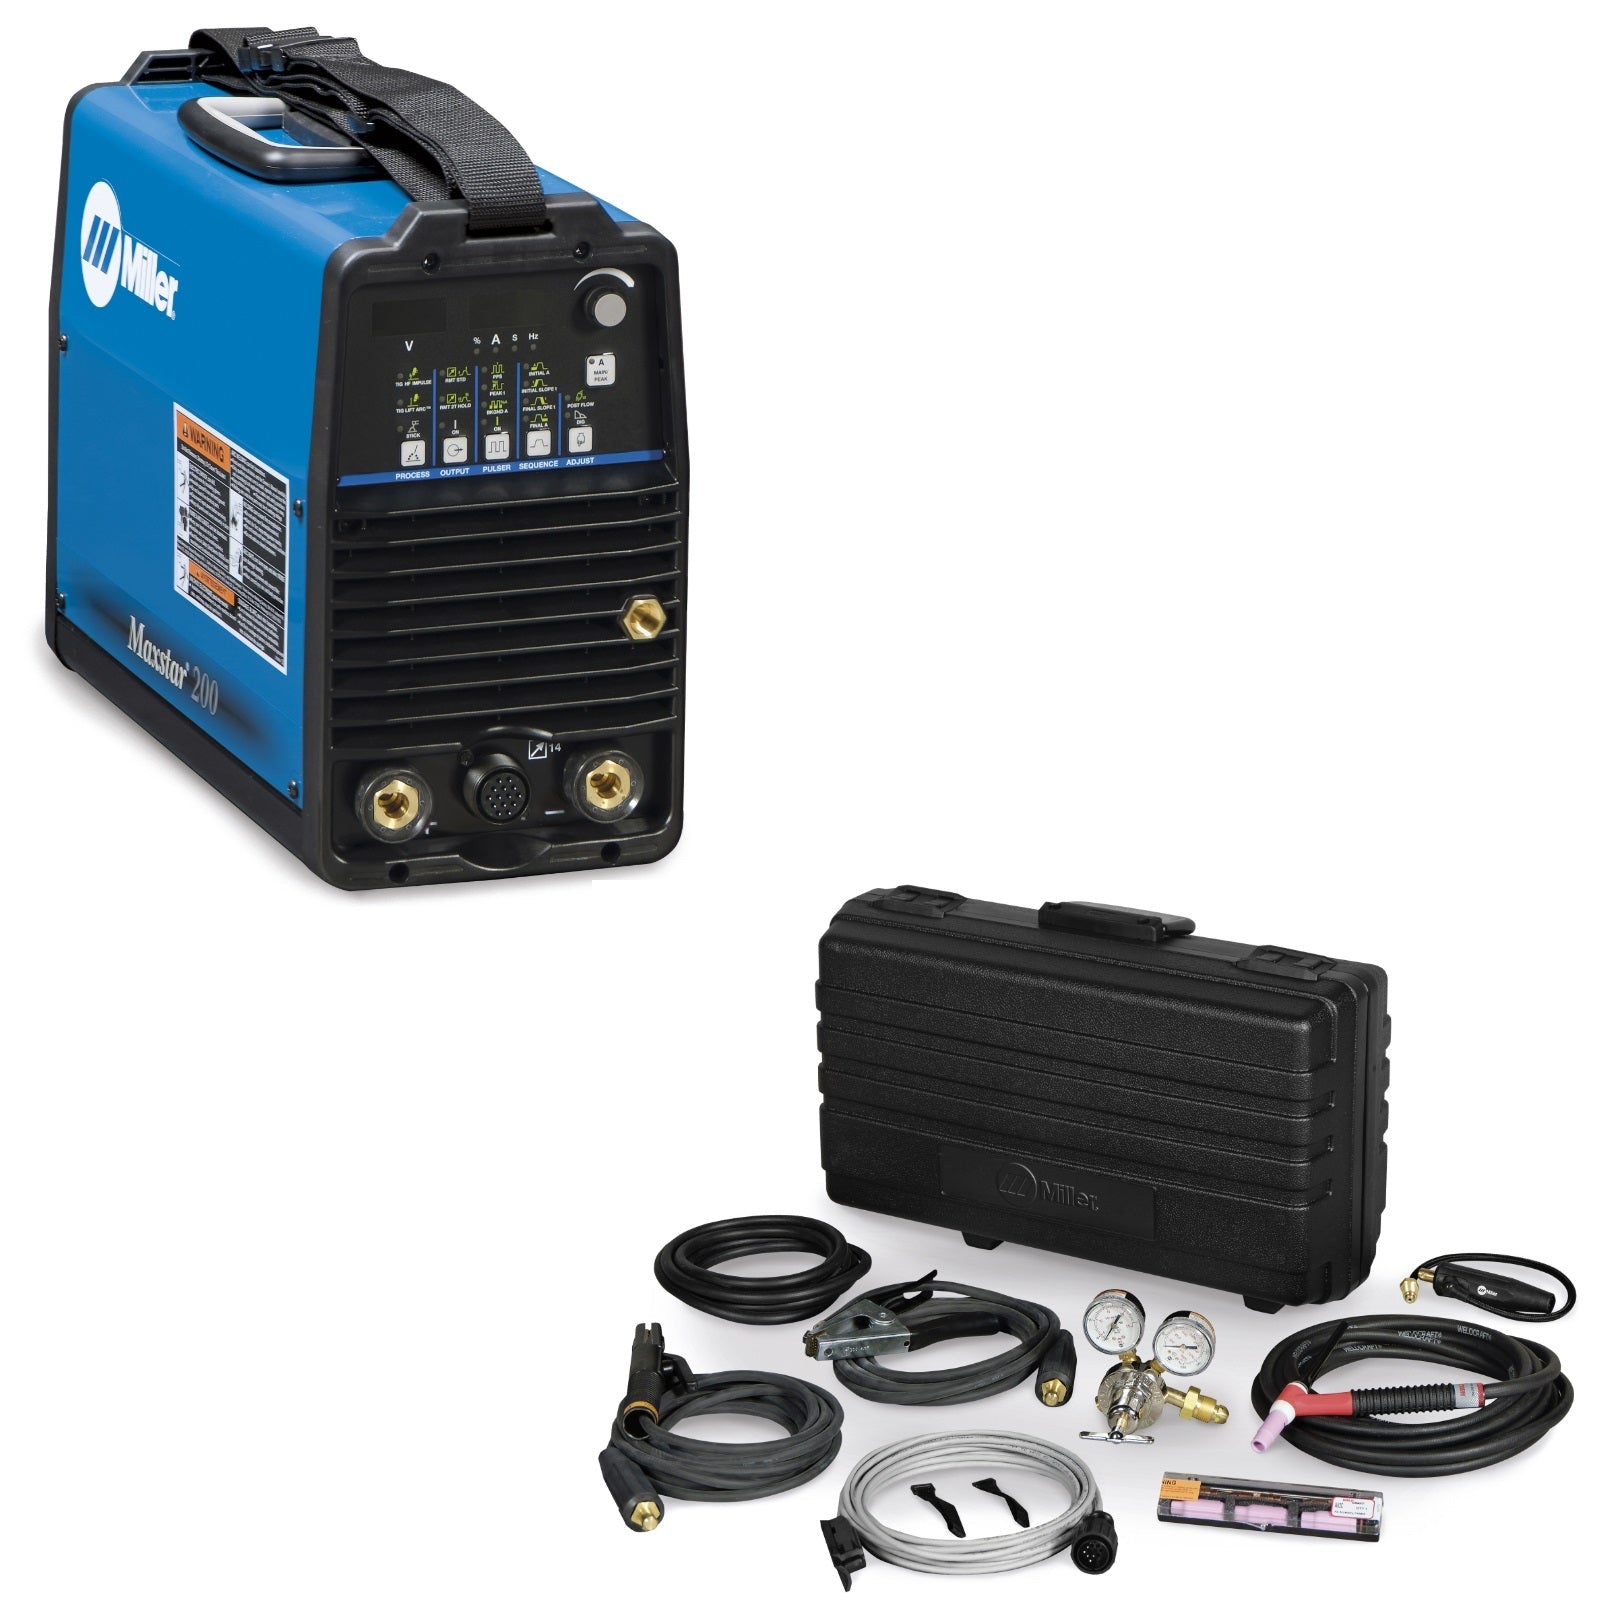 Miller Maxstar 200 DX TIG Welder and Air-Cooled Contractor Kit with Fingertip Control (951173)